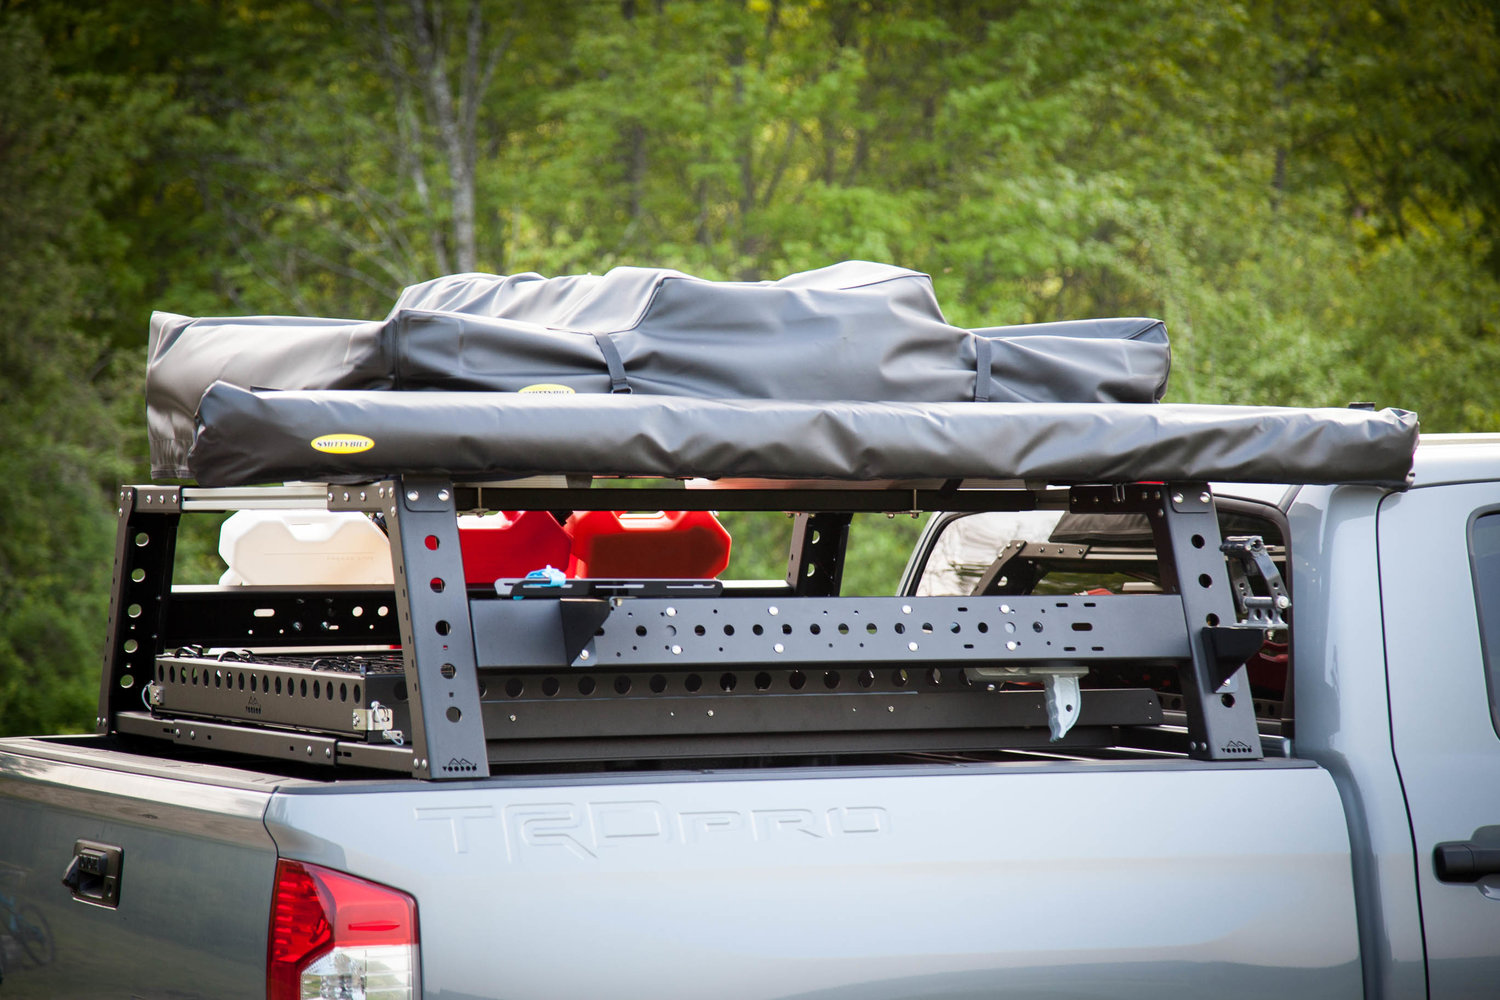 max modular steel max 18 high bed rack fits all toyota ford chevy ram and nissan trucks max modular truck bed racks